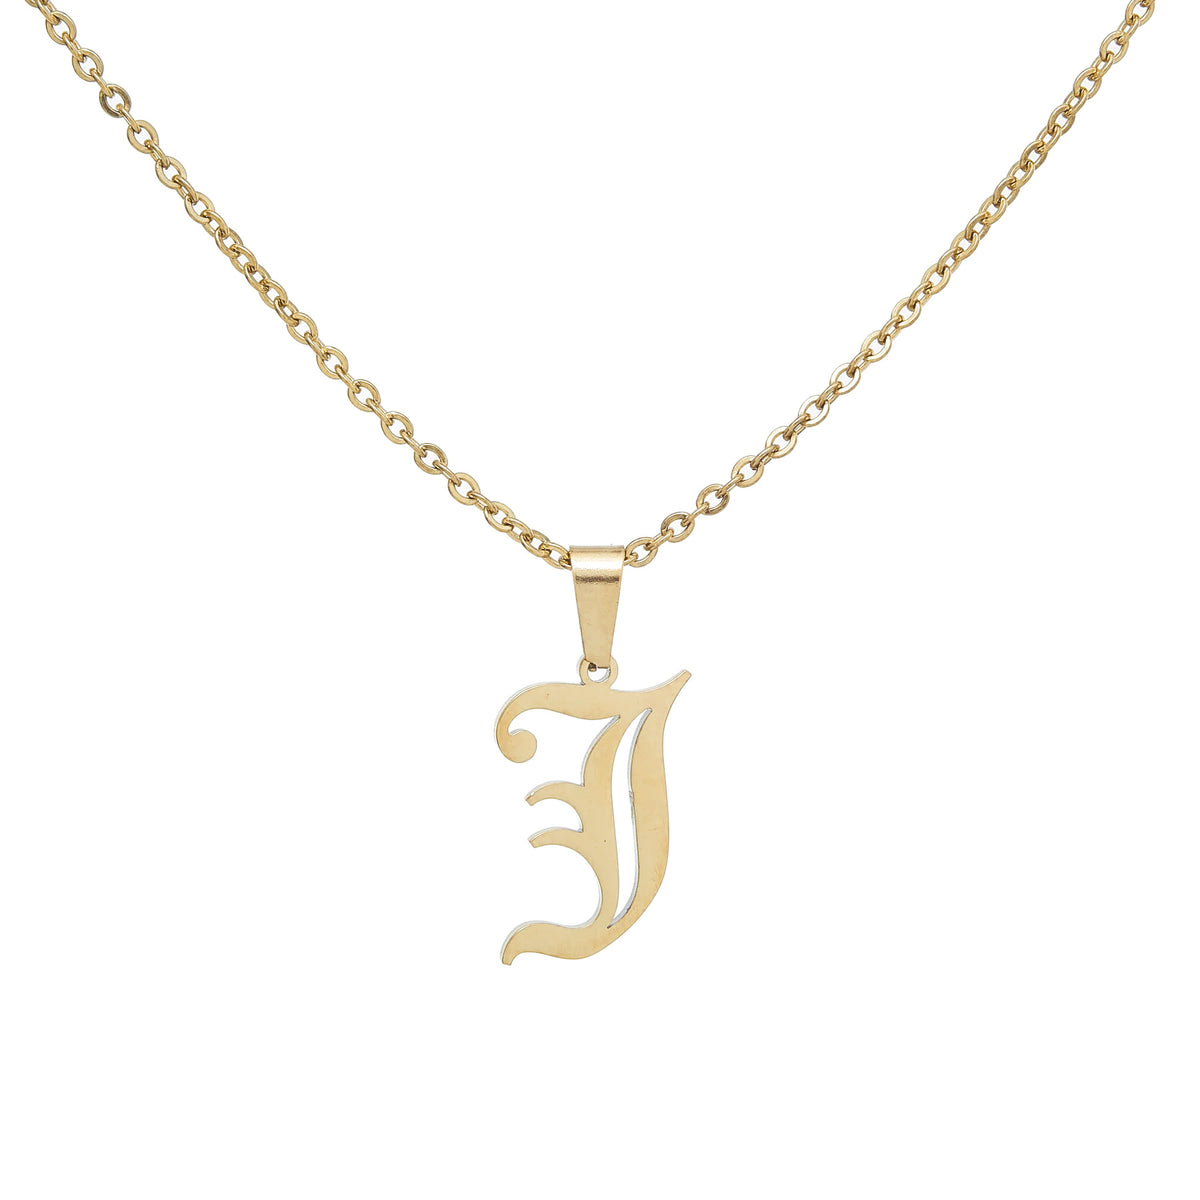 Personalized Mens Old English Monogram Necklace – Be Monogrammed